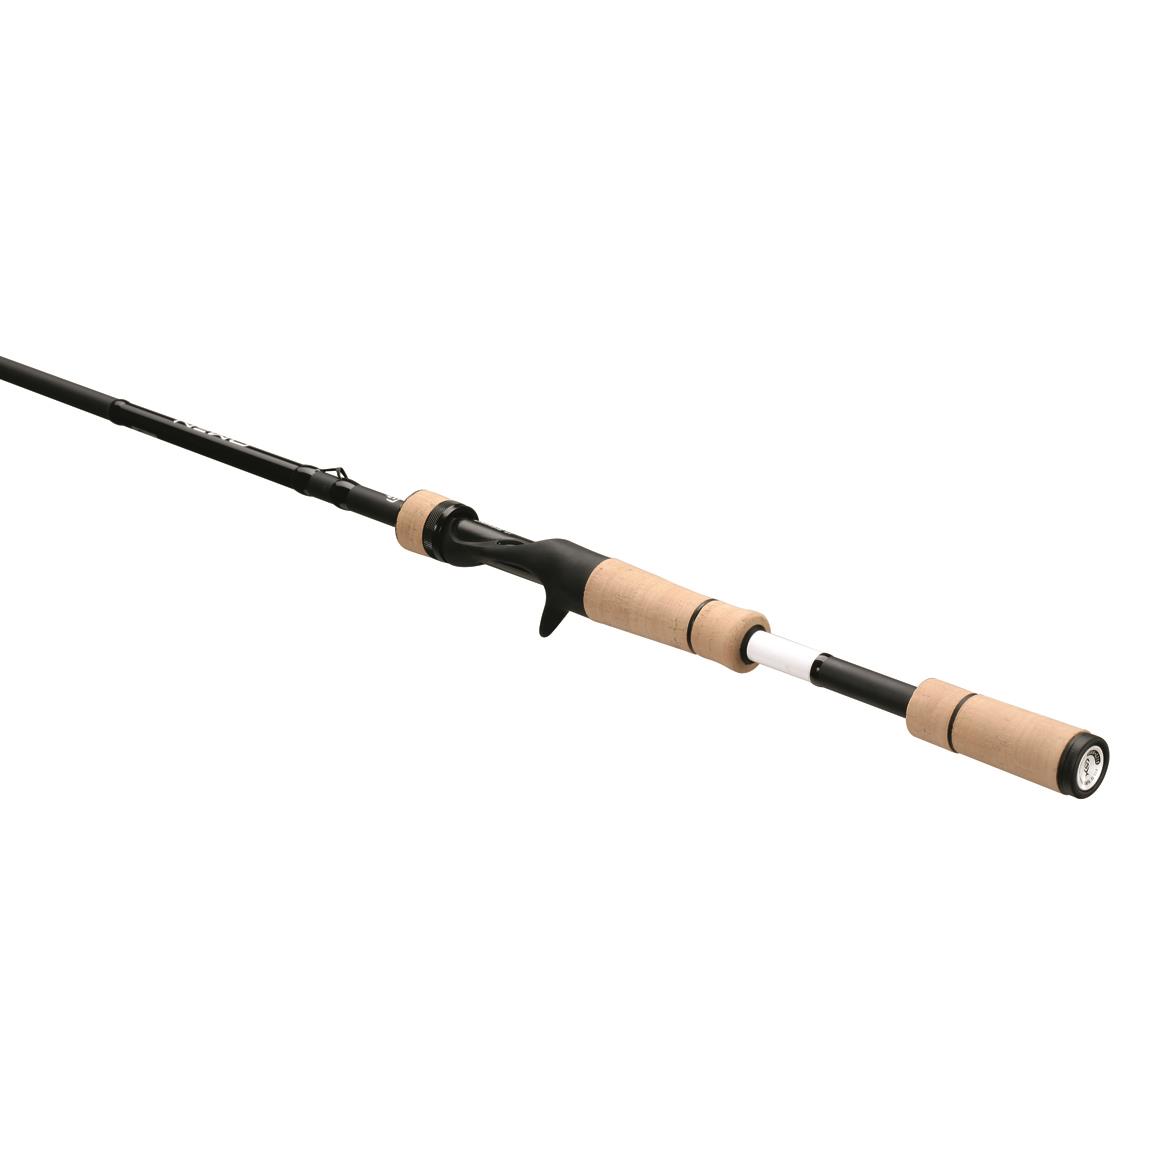 13 fishing chatter crank rod, Hot Sale Exclusive Offers,Up To 72% Off